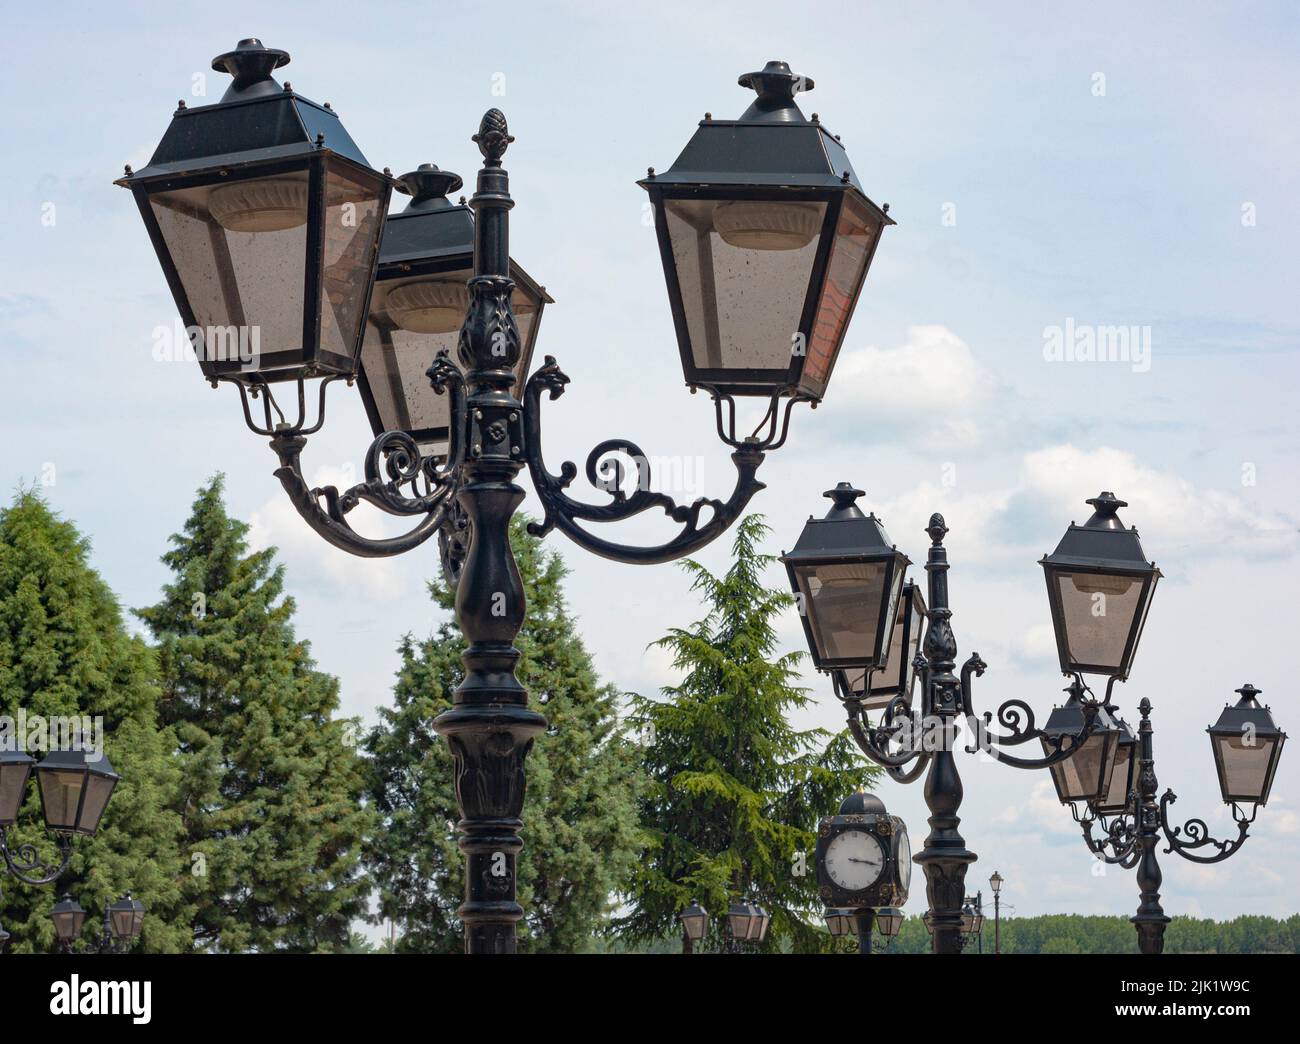 This is the downtown area of Vidin, Bulgaria, a city on the edge of the Danube. The old fancy lampposts in a row decorate the city business district. Stock Photo